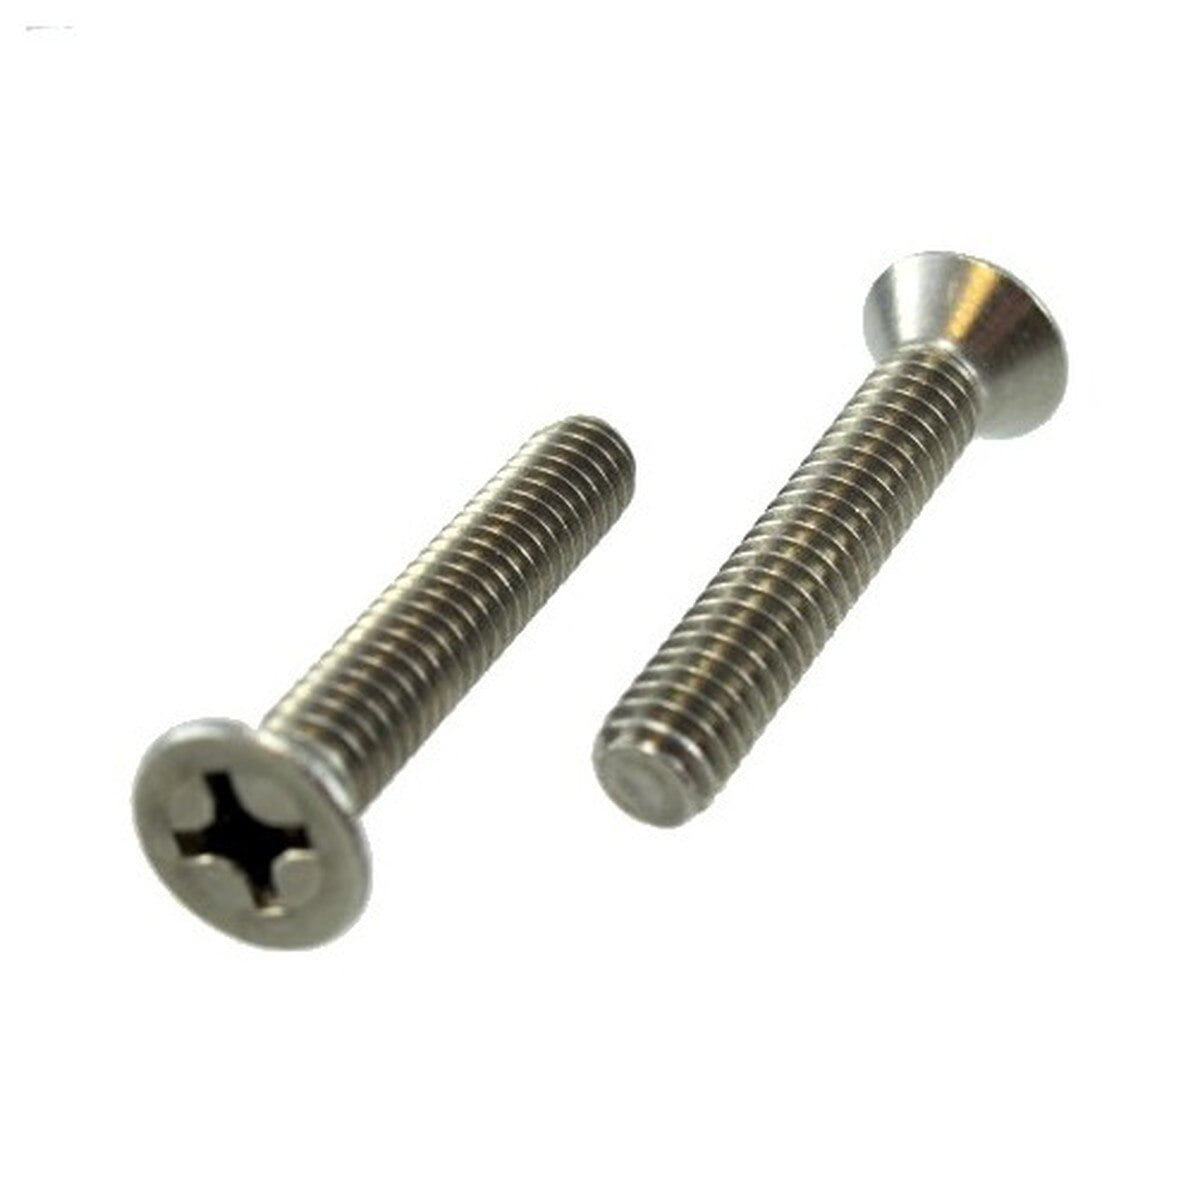 250 ASSORTED A2 STAINLESS STEEL M3 SLOTTED CSK MACHINE SCREWS METRIC BOLT KIT 